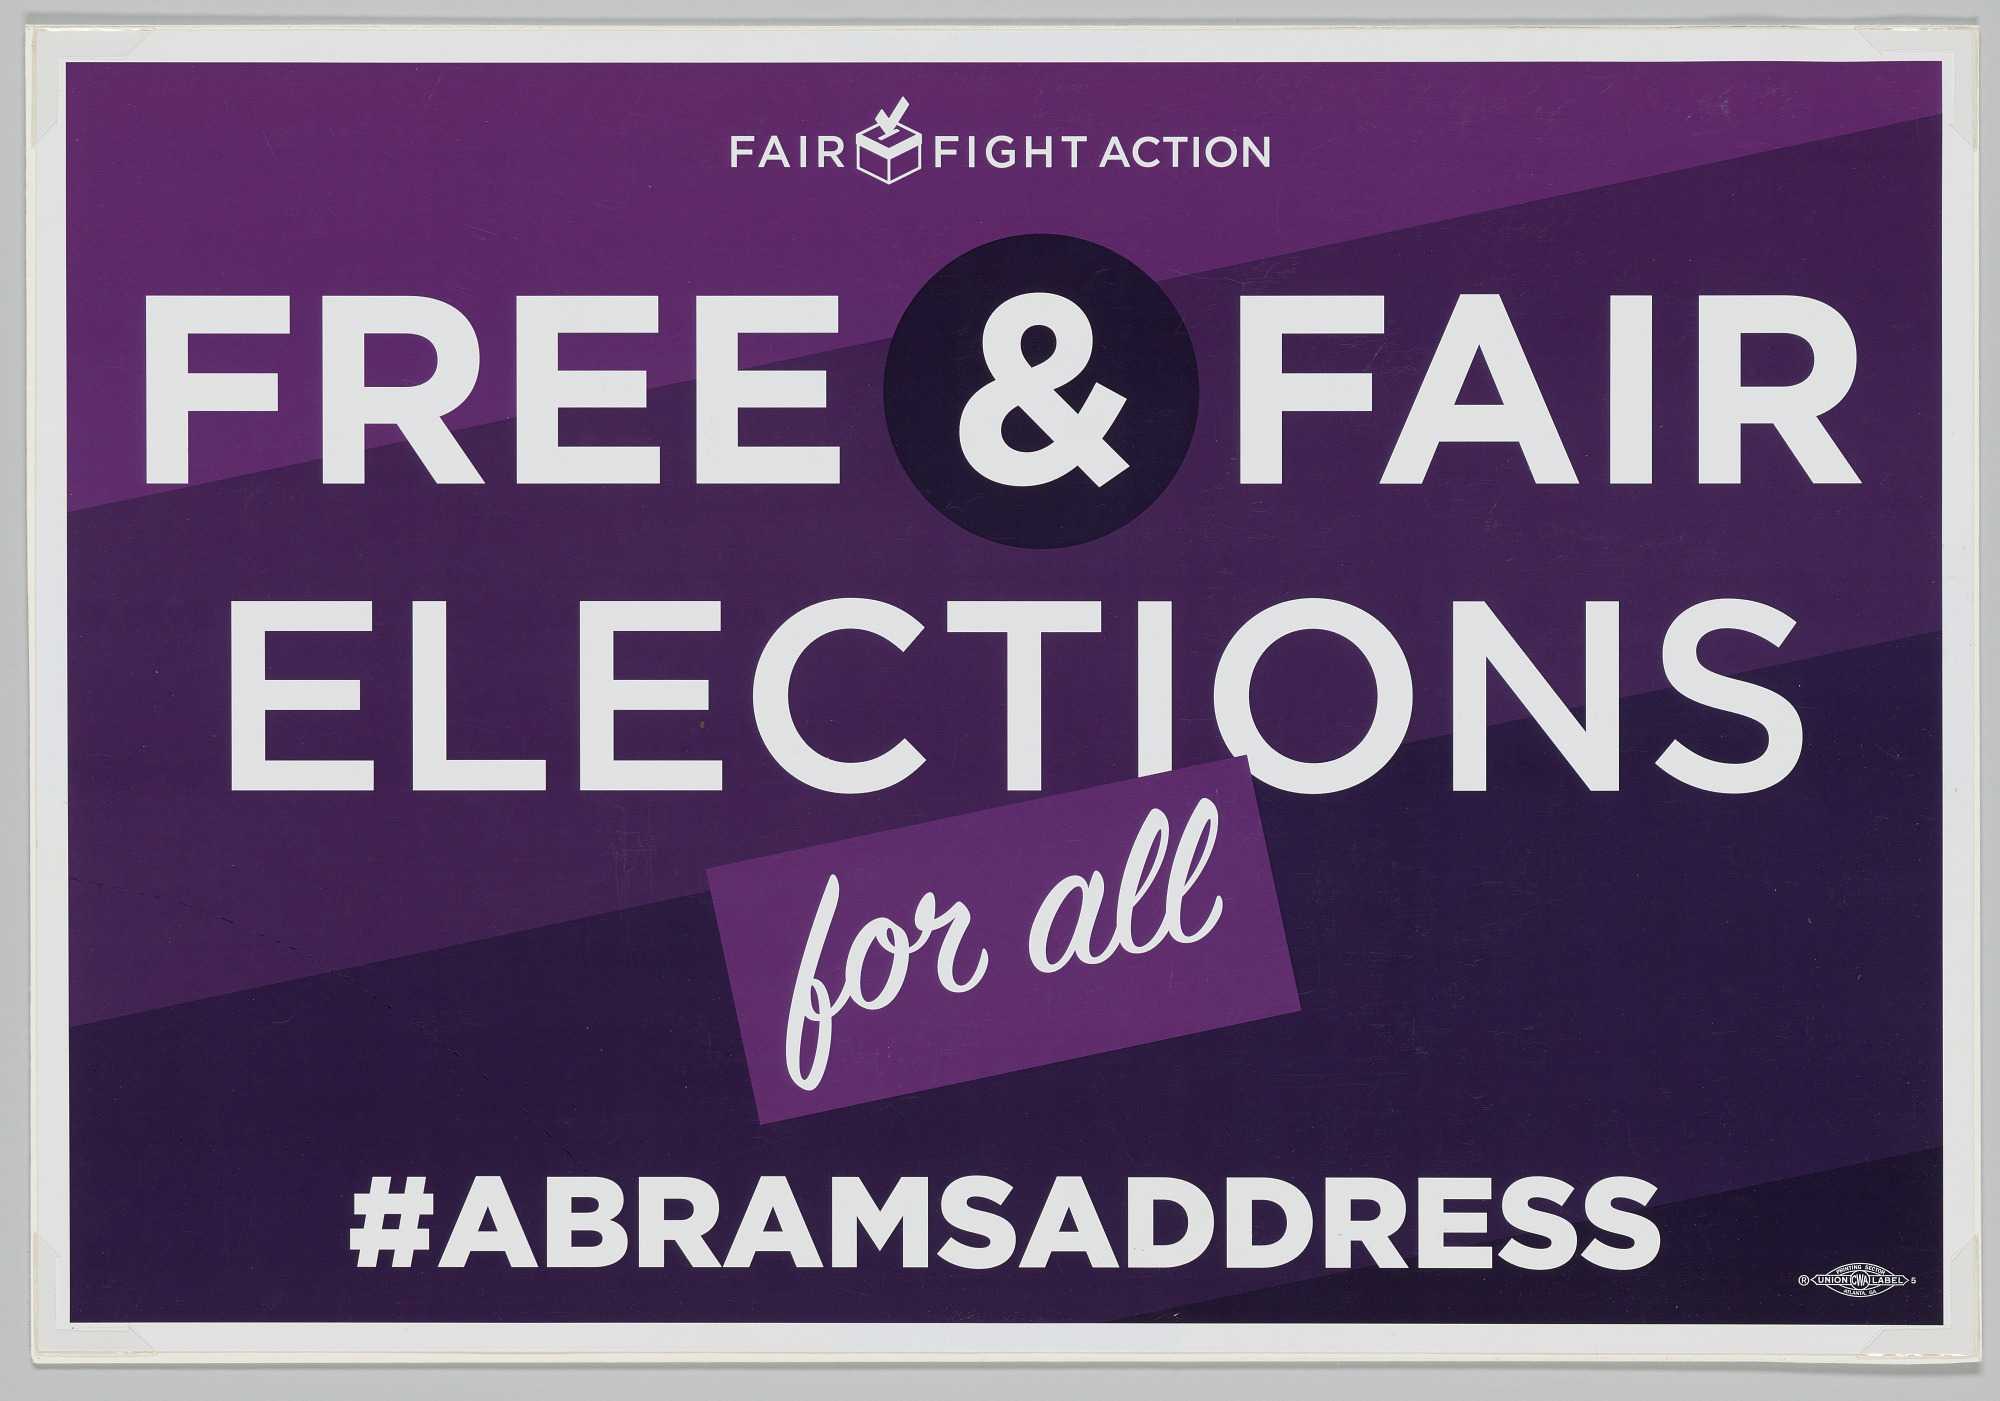 A purple and white double-print poster issued by Fair Fight Action organization. The rectangular poster has a gradient purple background with white text reading [FAIR FIGHT ACTION / FREE & FAIR / ELECTIONS / for all / #ABRAMSADDRESS].